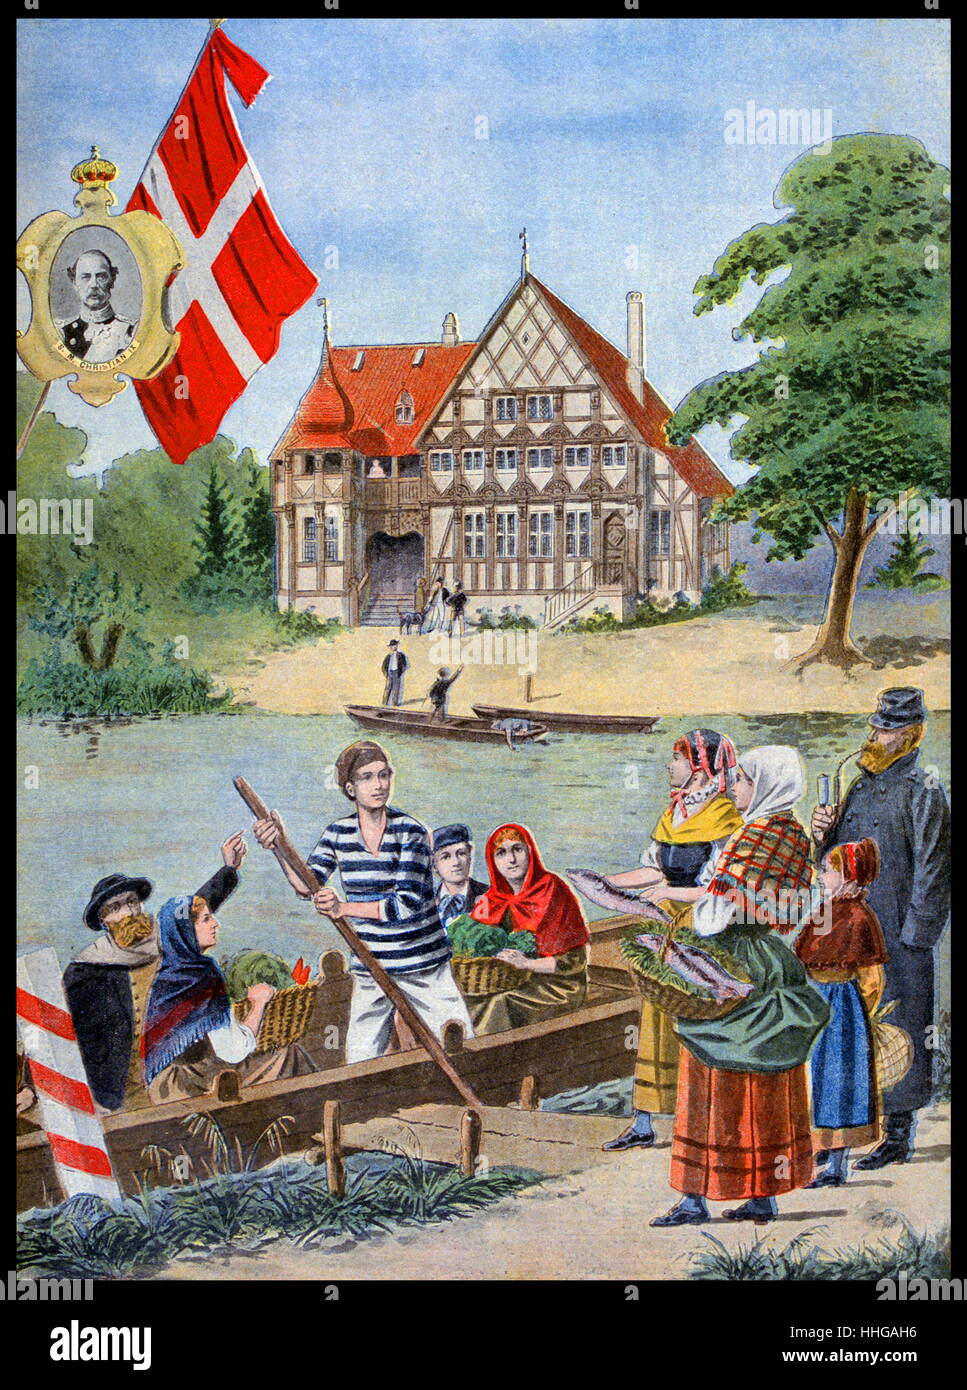 Illustration showing the Danish Pavilion, at the Exposition Universelle of 1900. Inset is a portrait of King Christian IX of Denmark. This was a fair held in Paris, France, from 14 April to 12 November 1900, to celebrate the achievements of the past century and to accelerate development into the next. Stock Photo